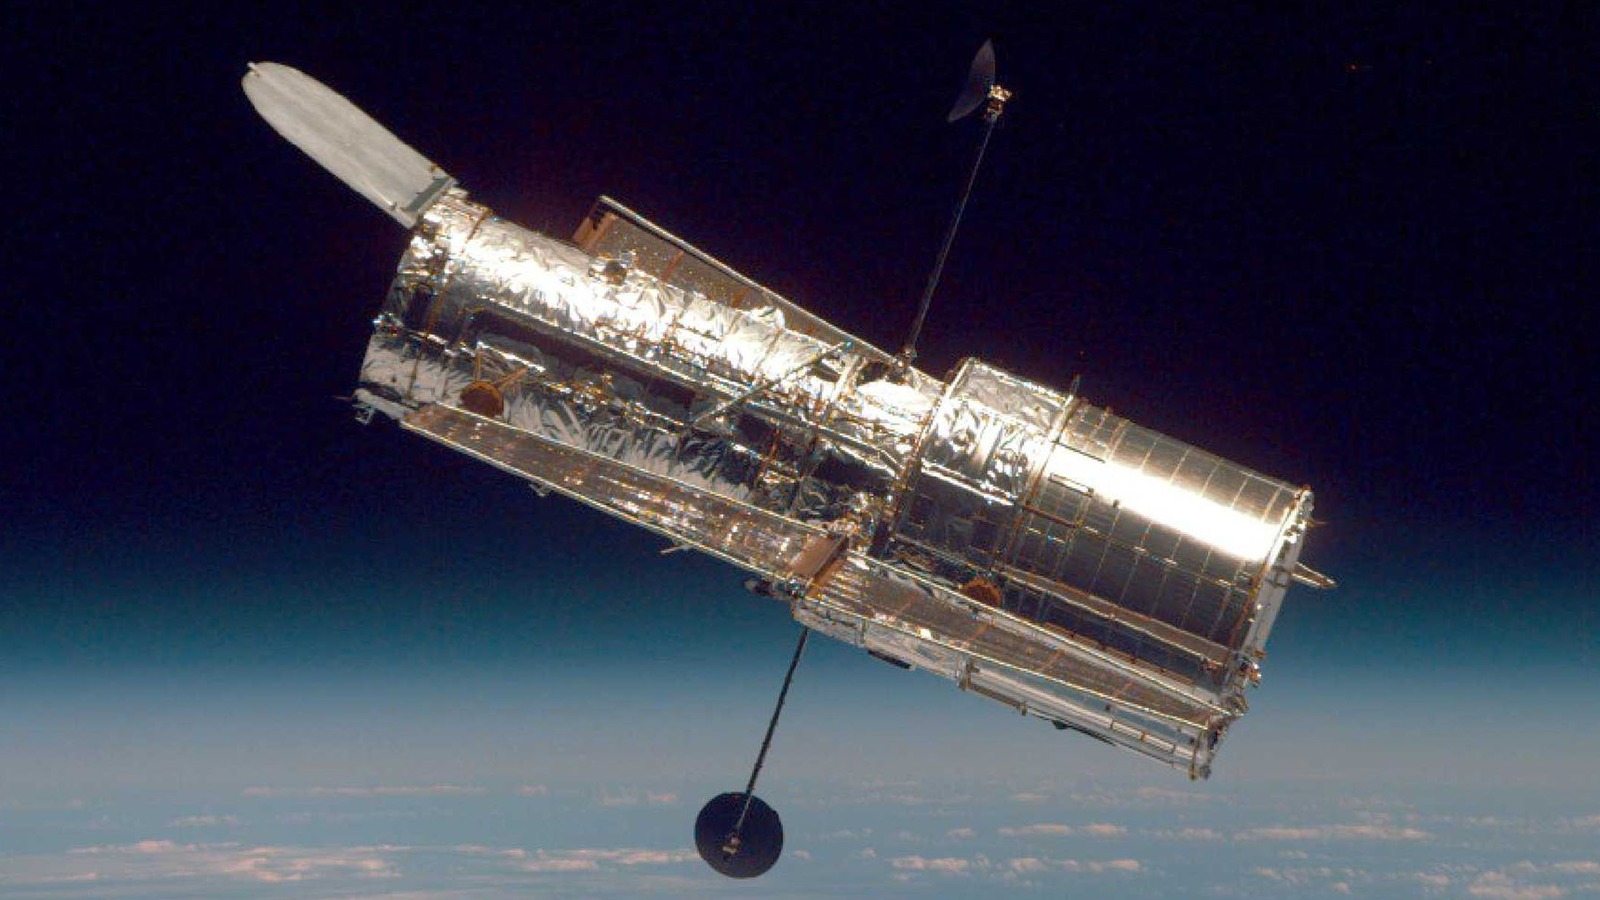 Everything The Hubble Space Telescope Achieved In Its 33rd Year In Orbit – SlashGear